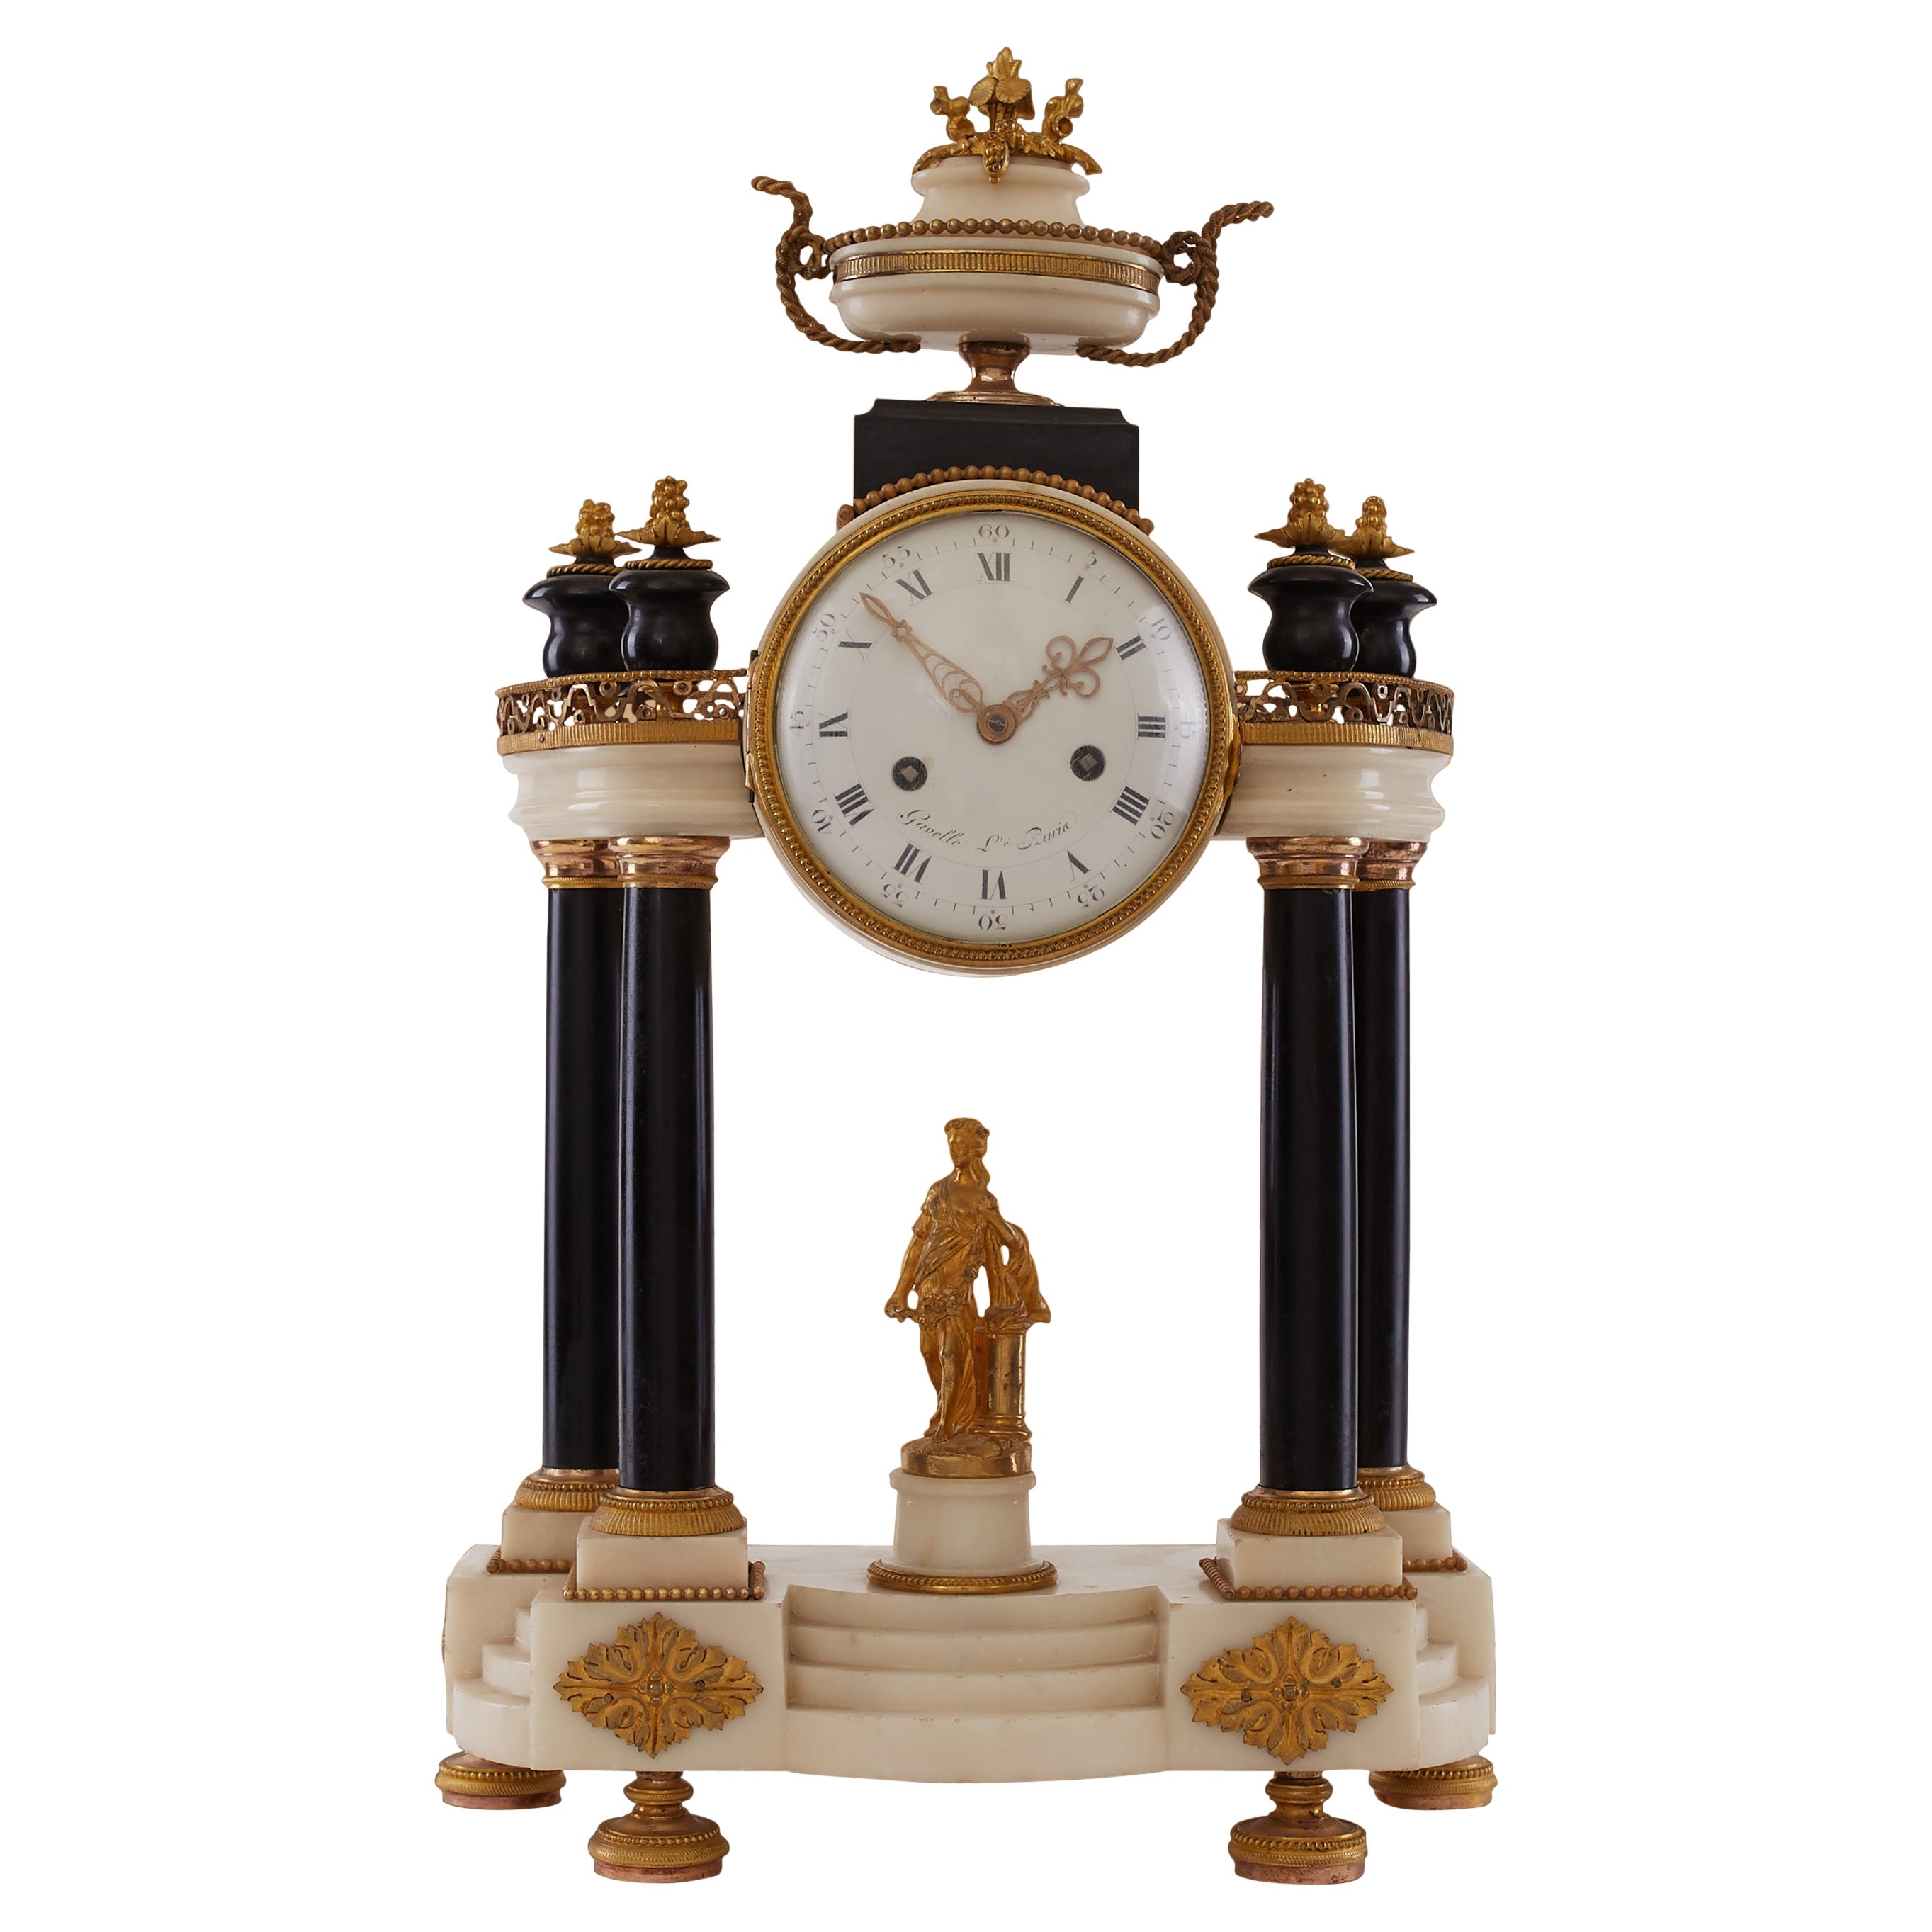 19th-Century Antique Portico Clock, the Eternal Wait of a Girl